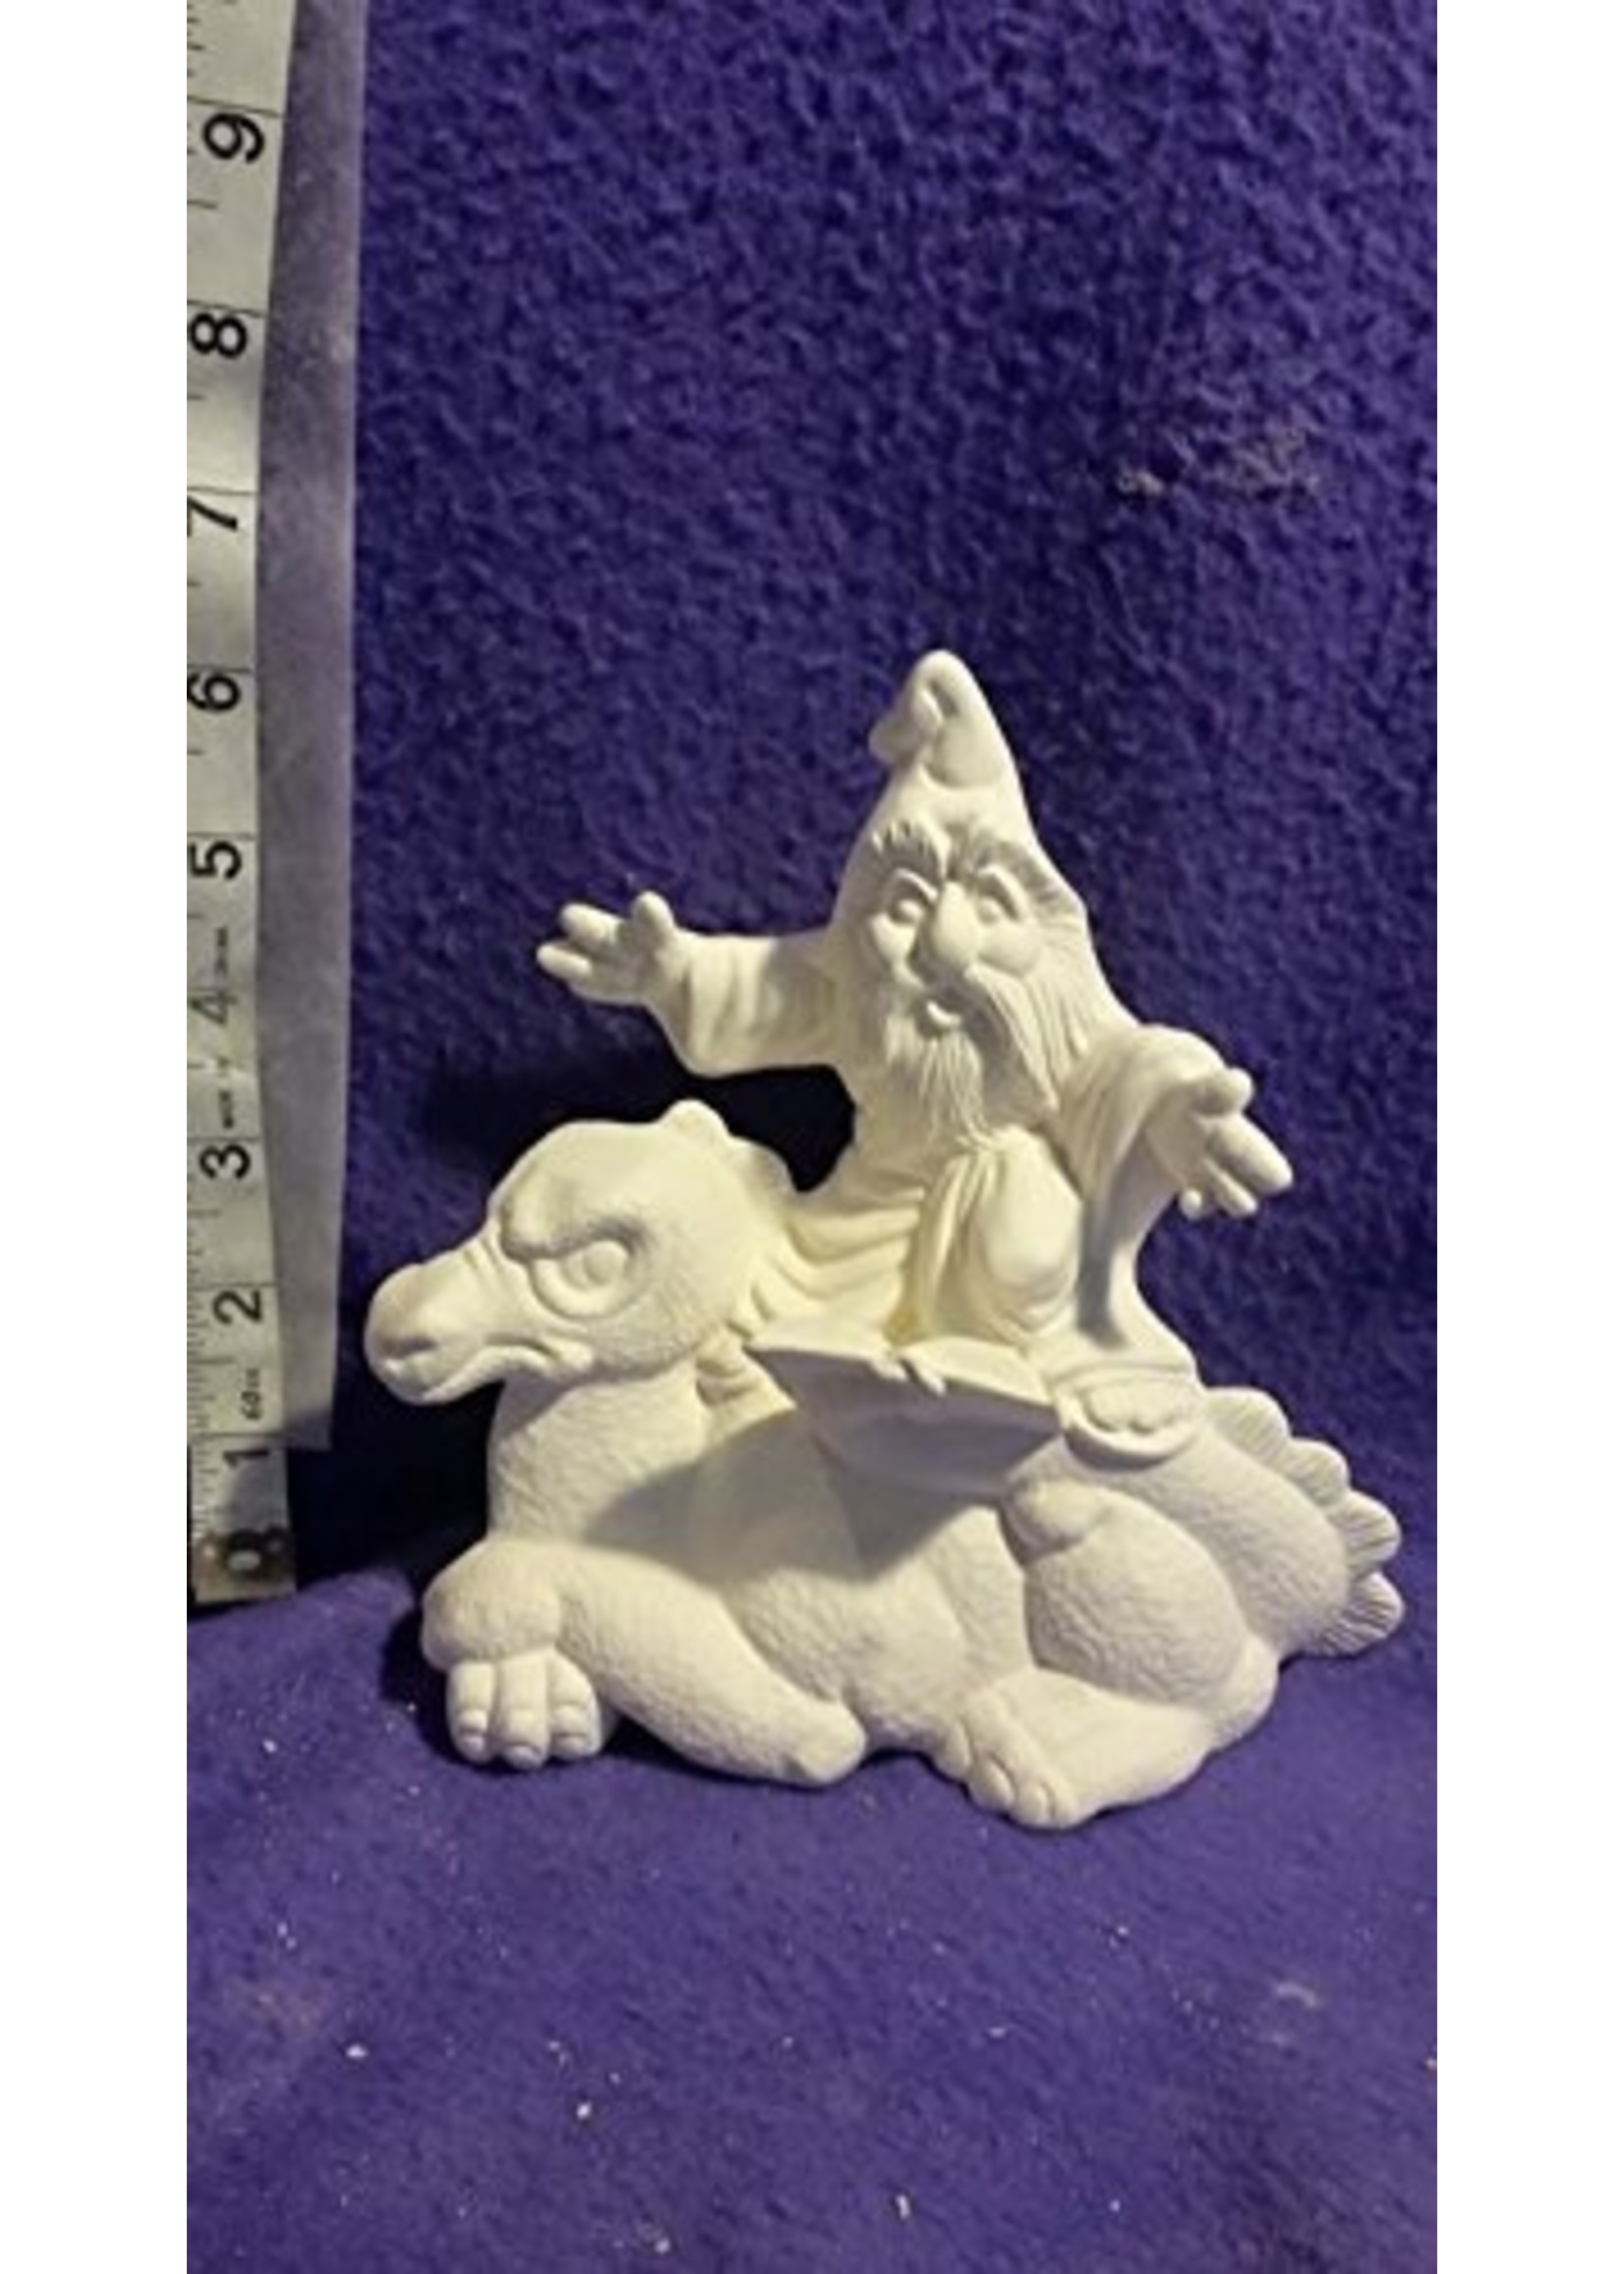 Creative Kreations Ceramics and Gifts Wizard Sitting on Dragon 6" Ceramic Bisque, Ready to Paint